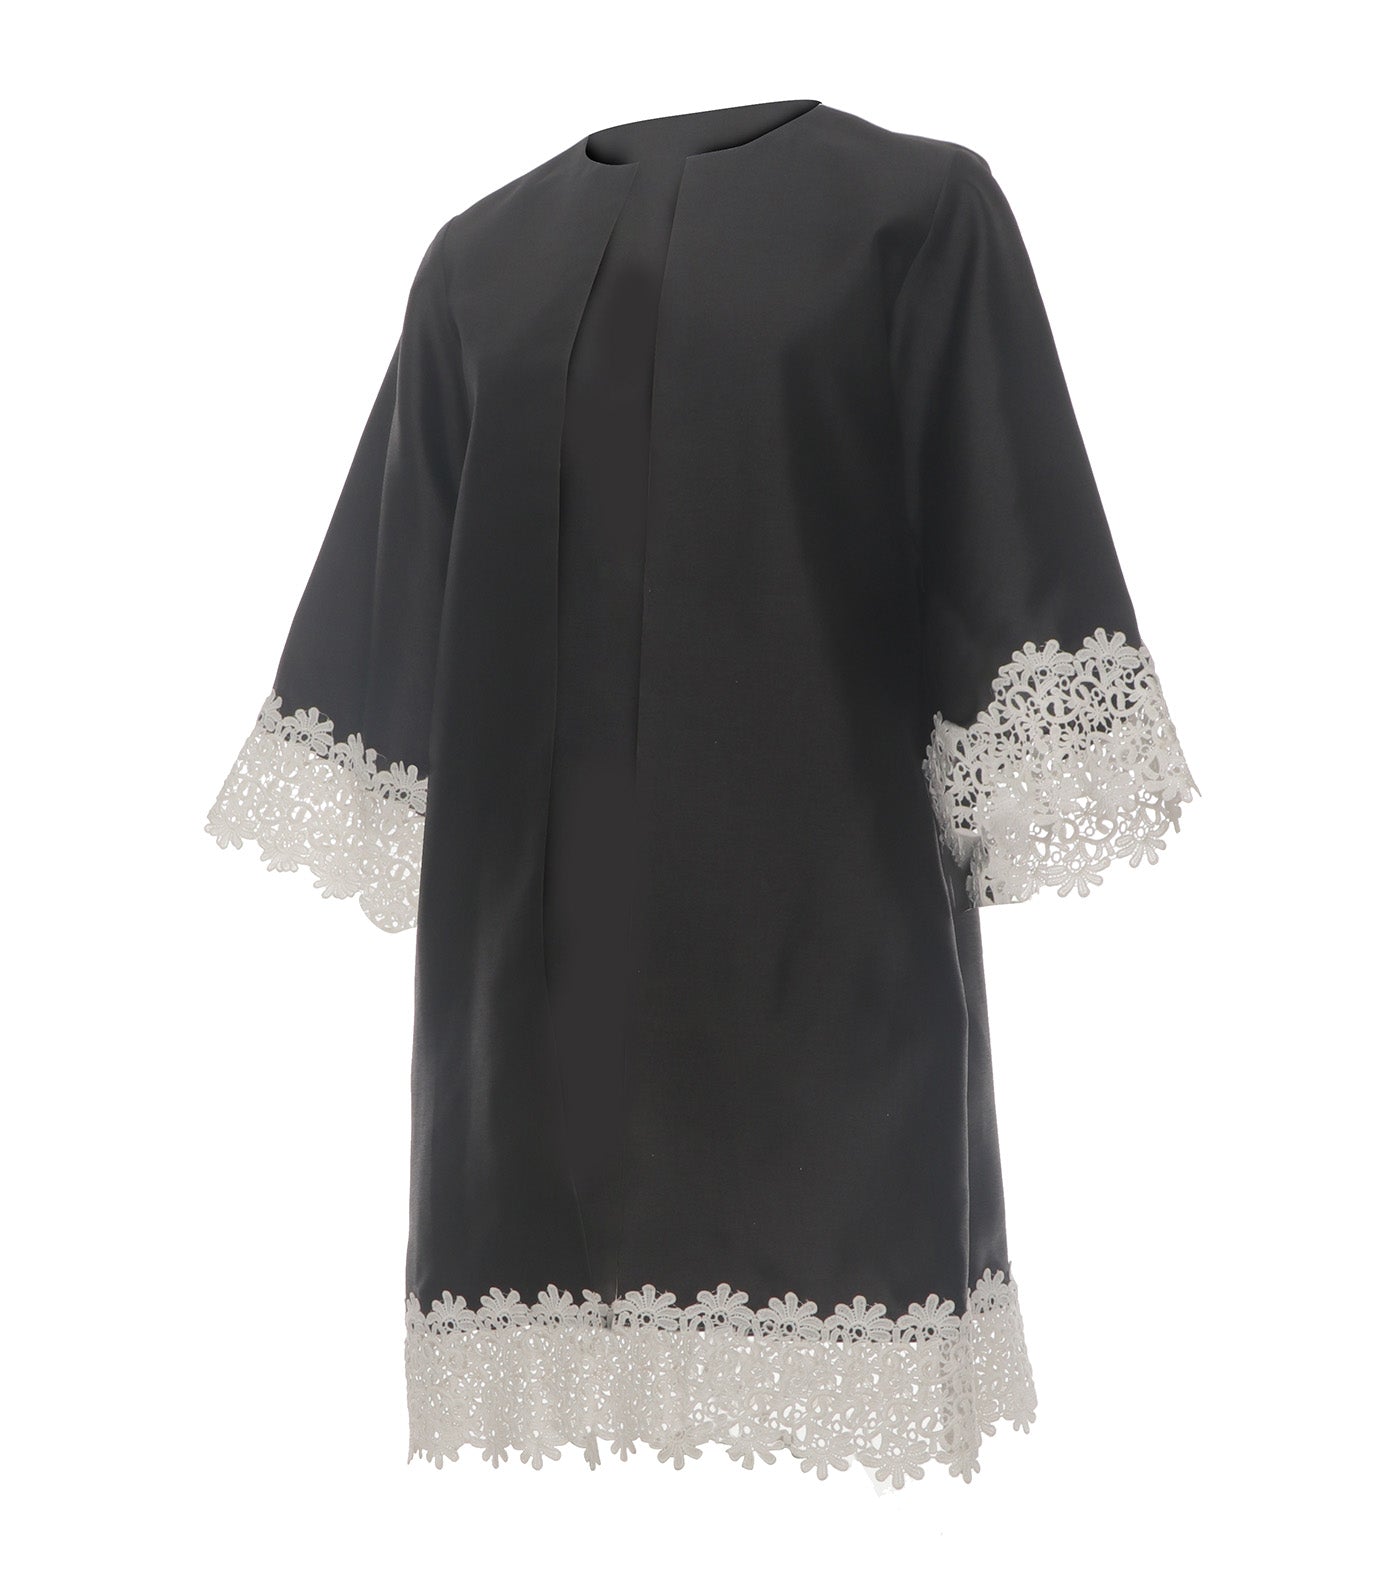 Domino Dustcoat with Lace Applique Black